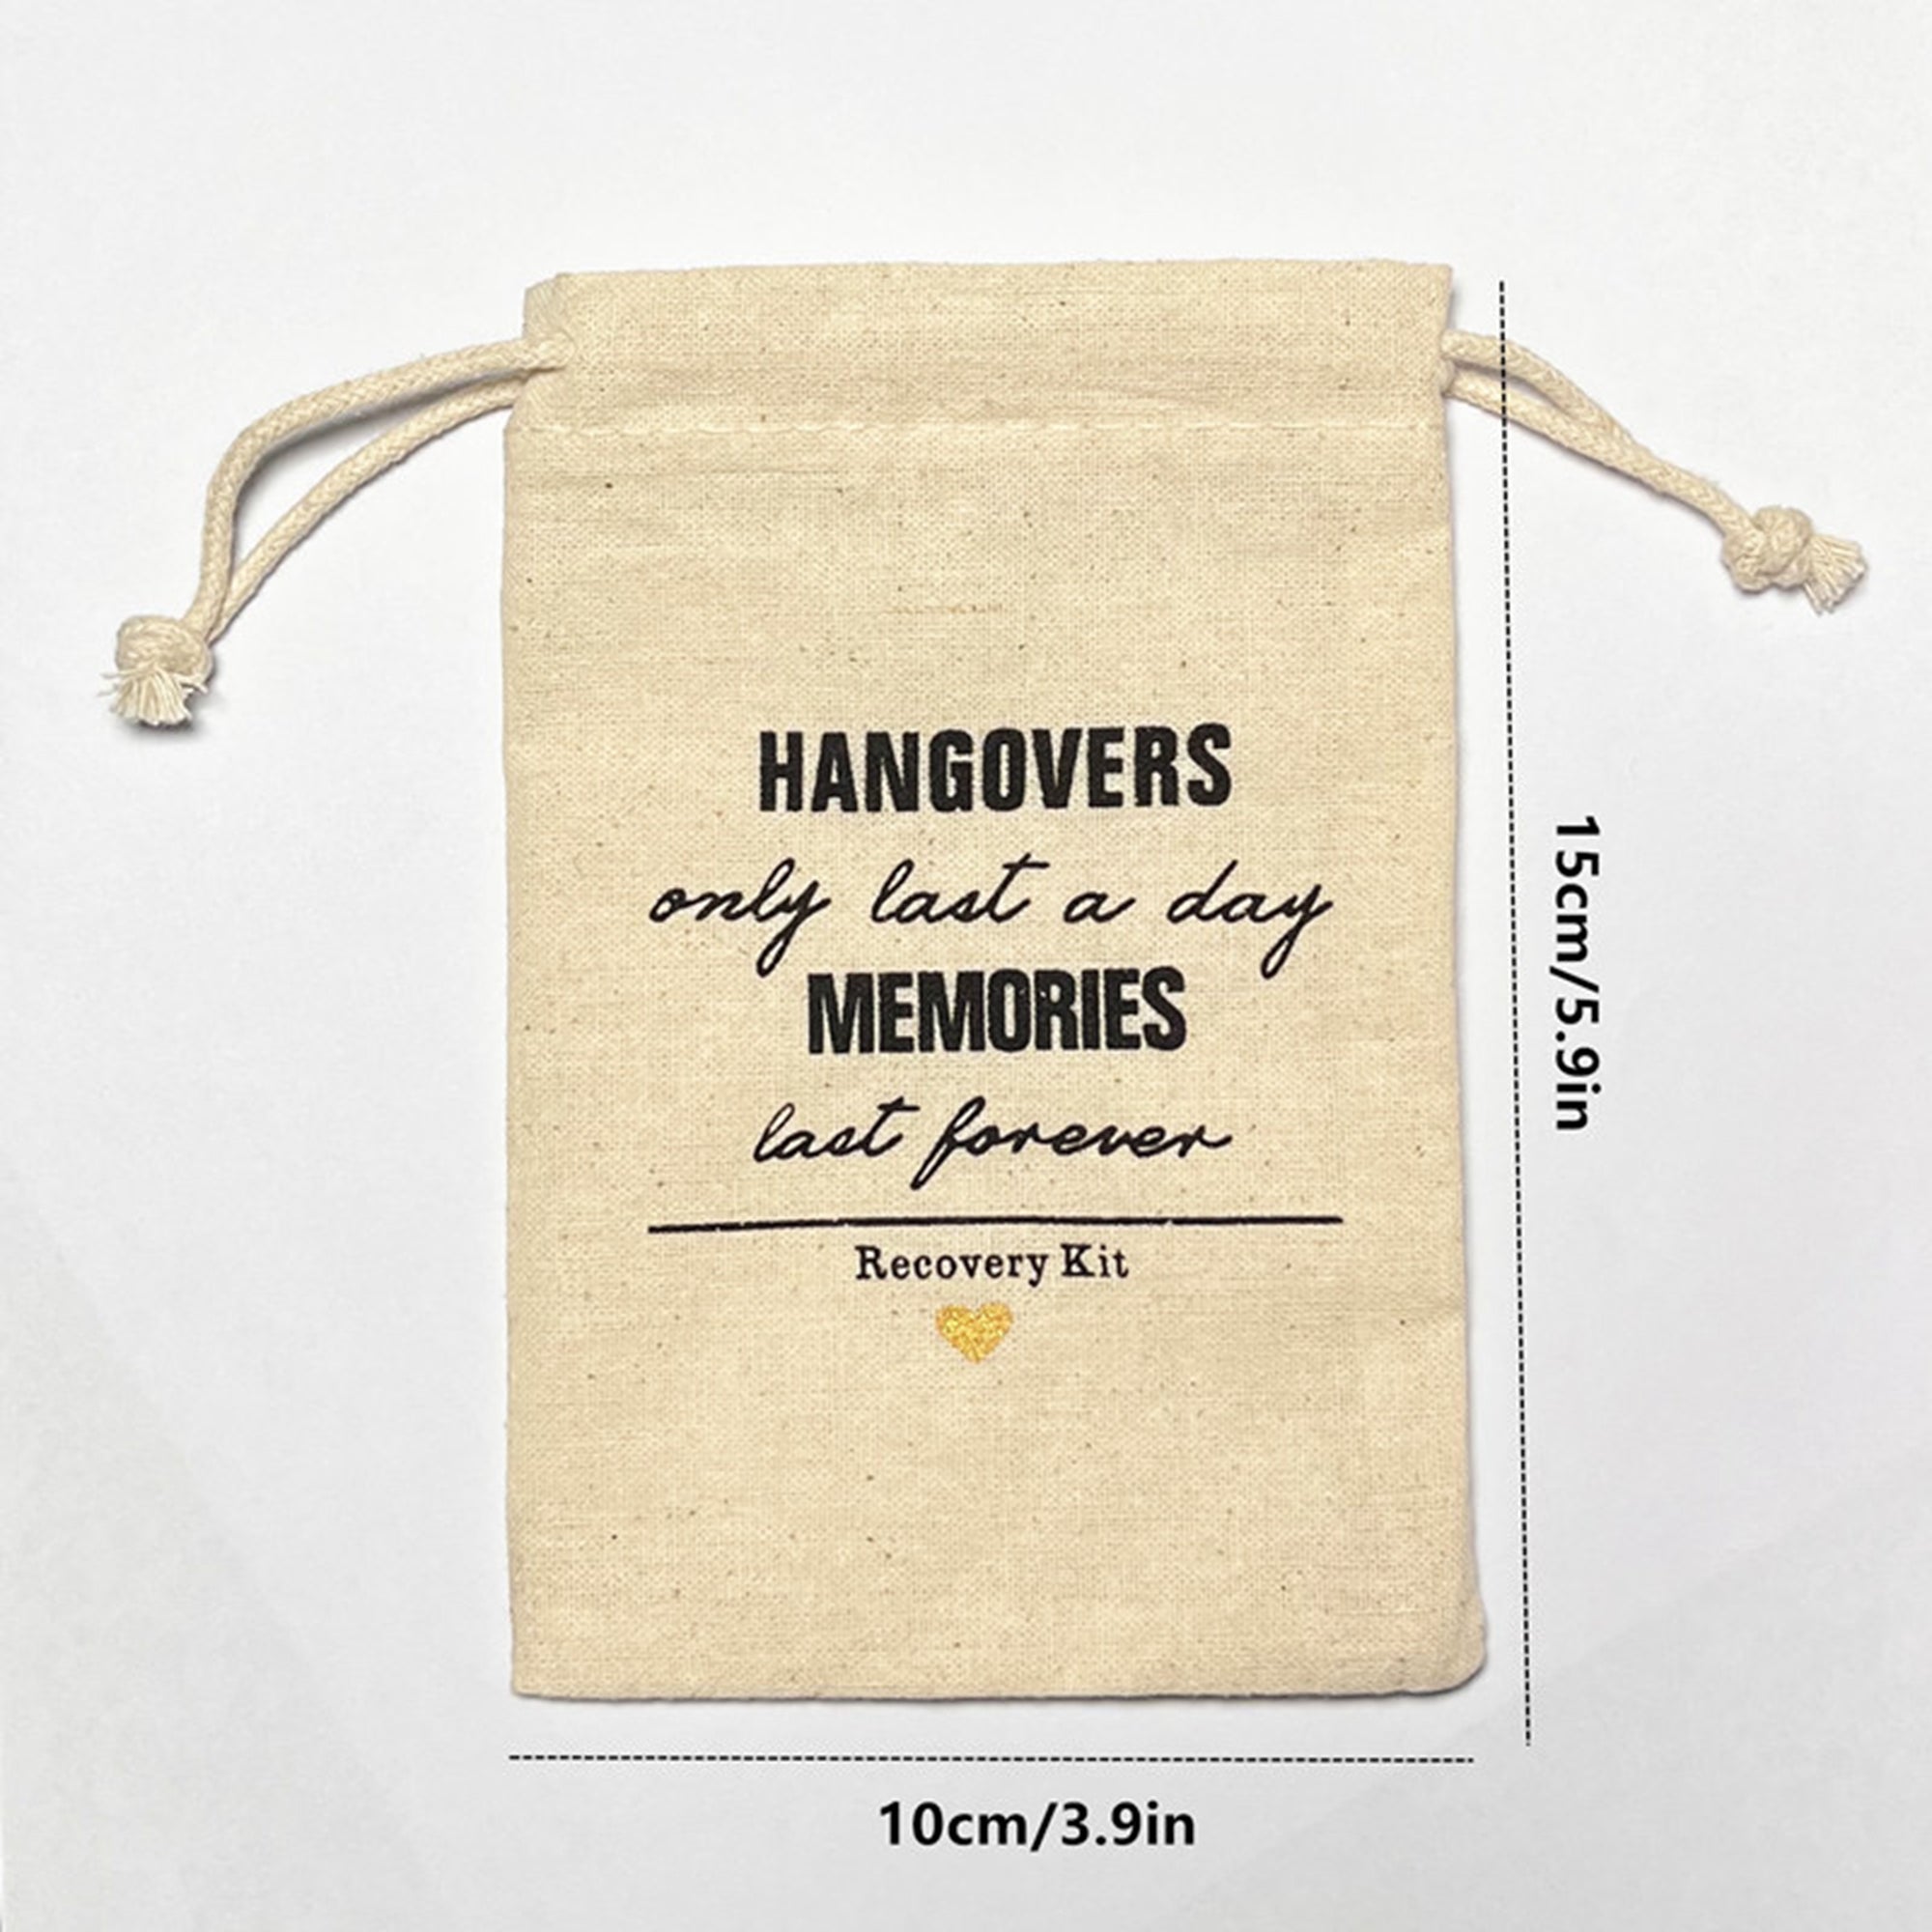 Bachelorette Party Bags - I Regret Nothing Hangover Kit Bags - Hangover Recovery Kit - Bachelorette Party Bags - Hen Party Bags